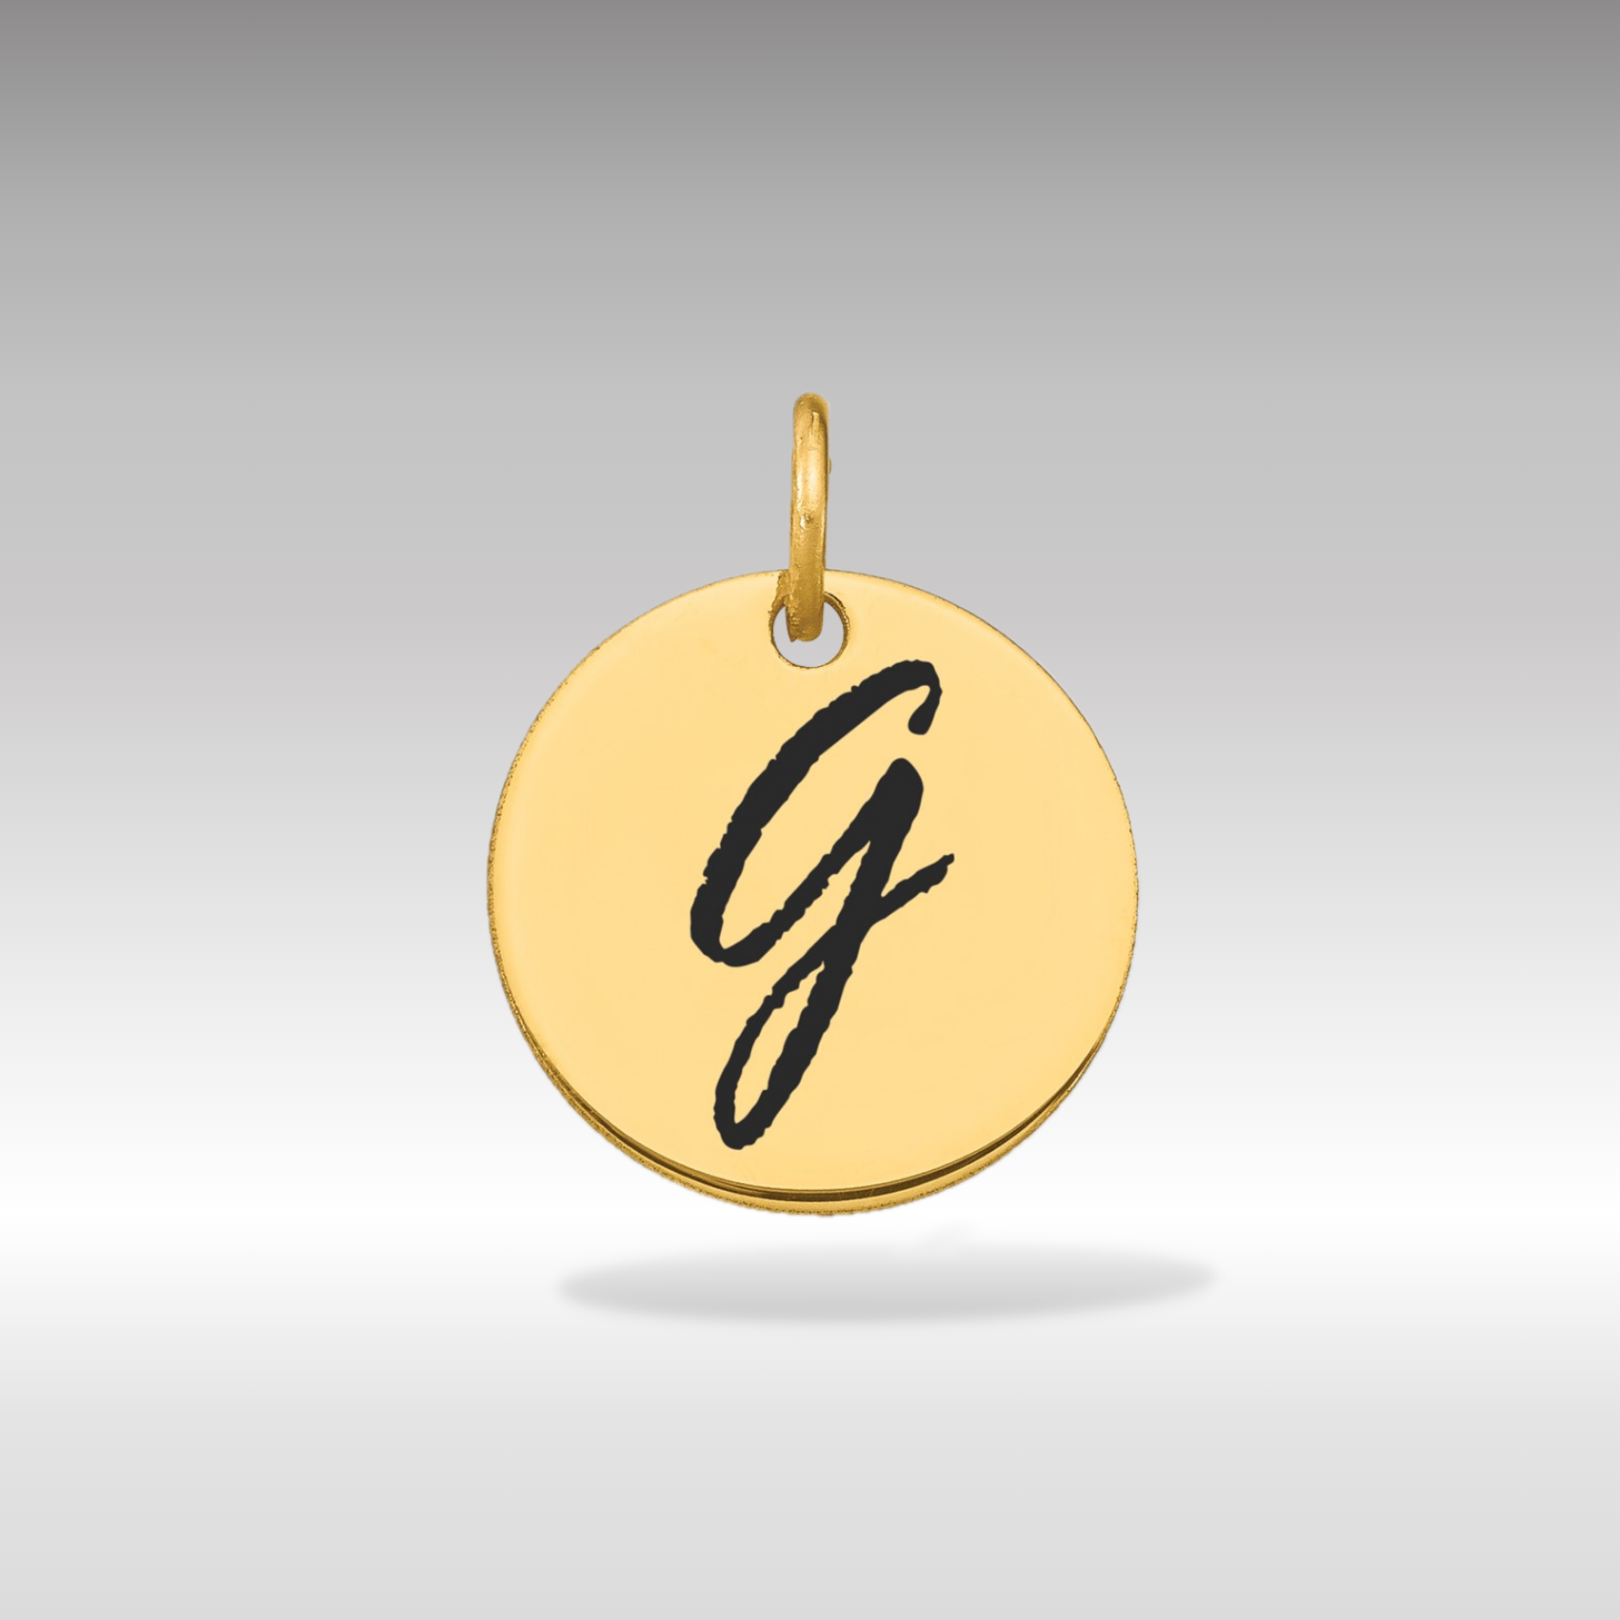 14K Gold Script Letter 'g' Circular Charm with Black Enamel - Charlie & Co. Jewelry